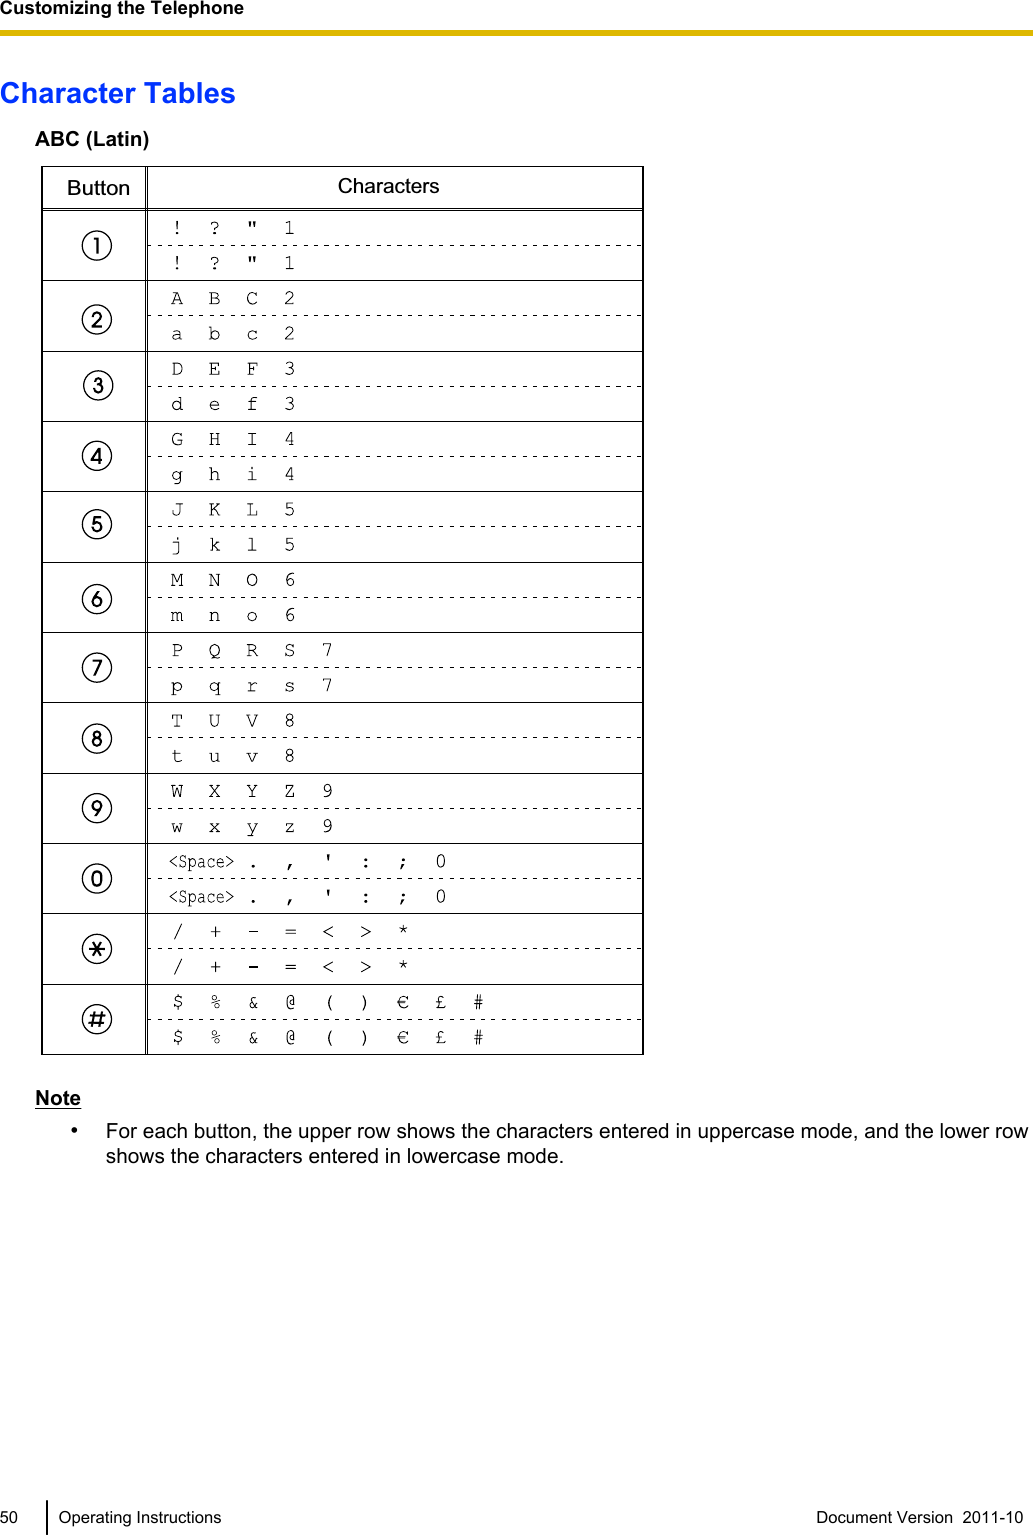 Character TablesABC (Latin)ButtonCharactersNote•For each button, the upper row shows the characters entered in uppercase mode, and the lower rowshows the characters entered in lowercase mode.50 Operating Instructions Document Version  2011-10  Customizing the Telephone